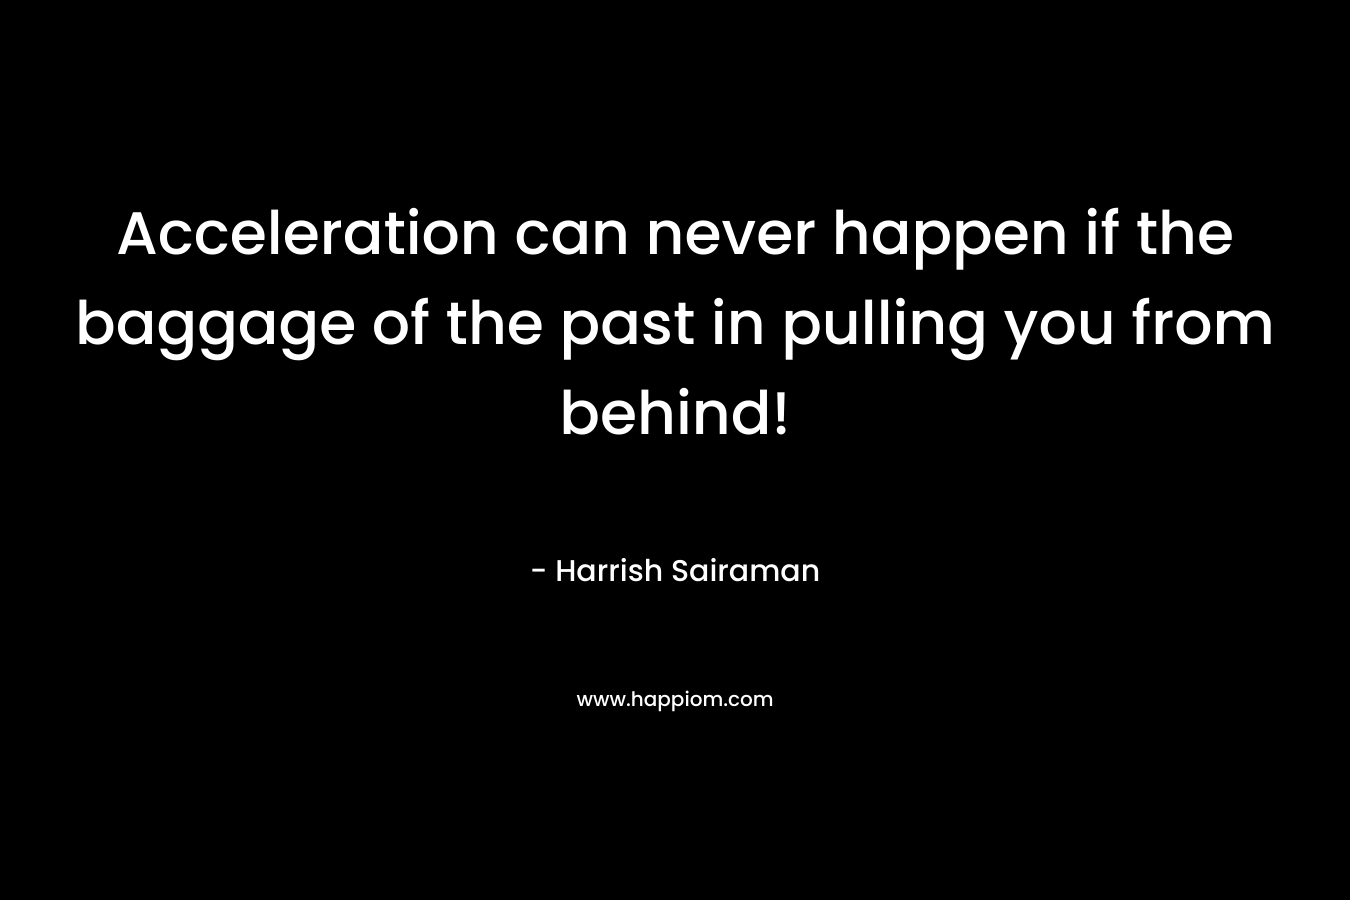 Acceleration can never happen if the baggage of the past in pulling you from behind! – Harrish Sairaman